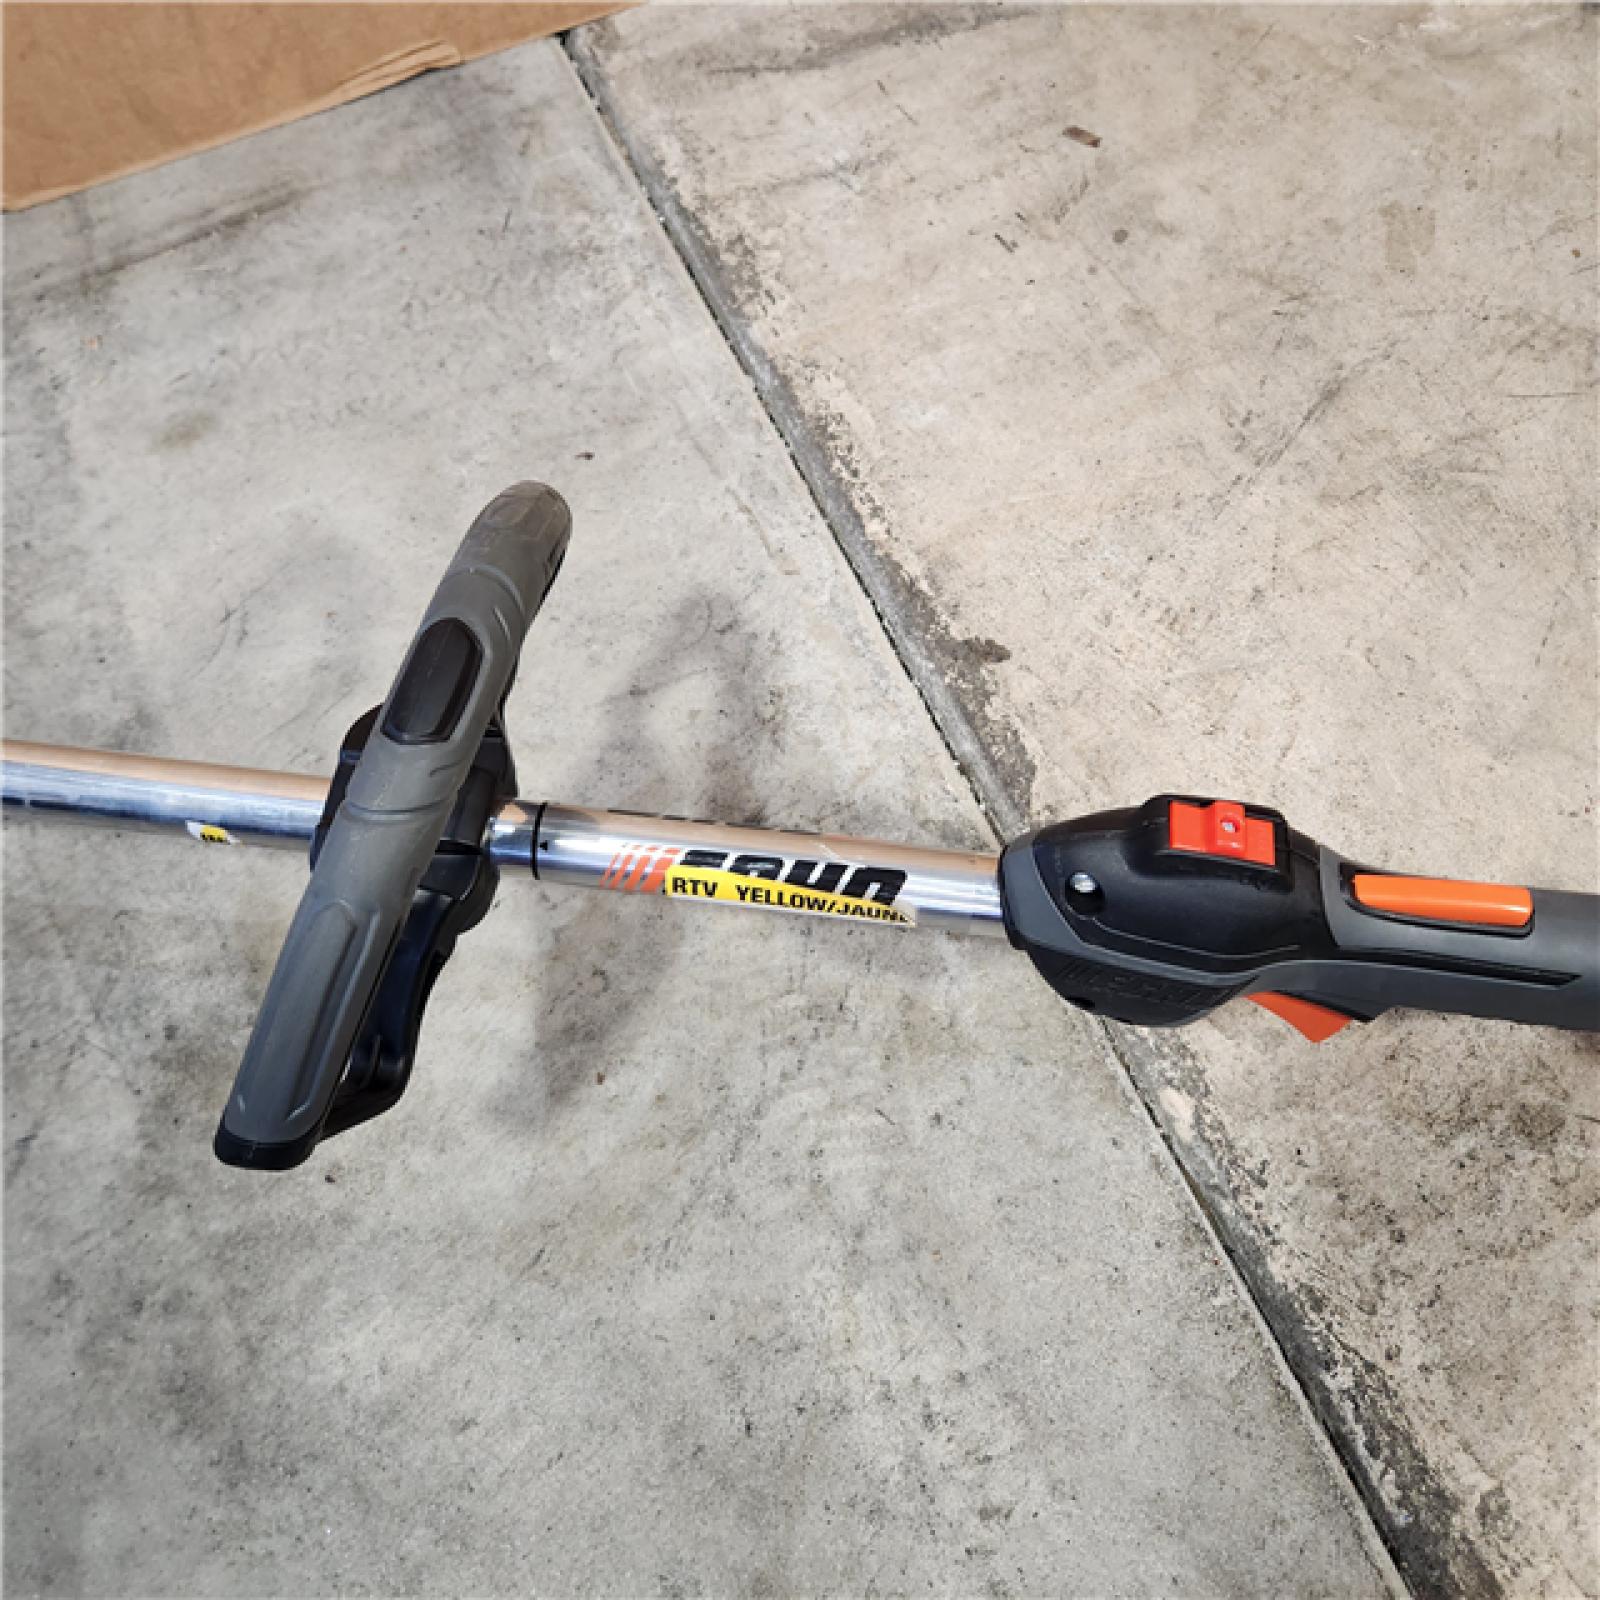 Houston Location - AS-IS Echo SRM-225 21.2cc 2 Stroke Fuel Efficient Durable Gas Straight Shaft Trimmer - Appears IN GOOD Condition